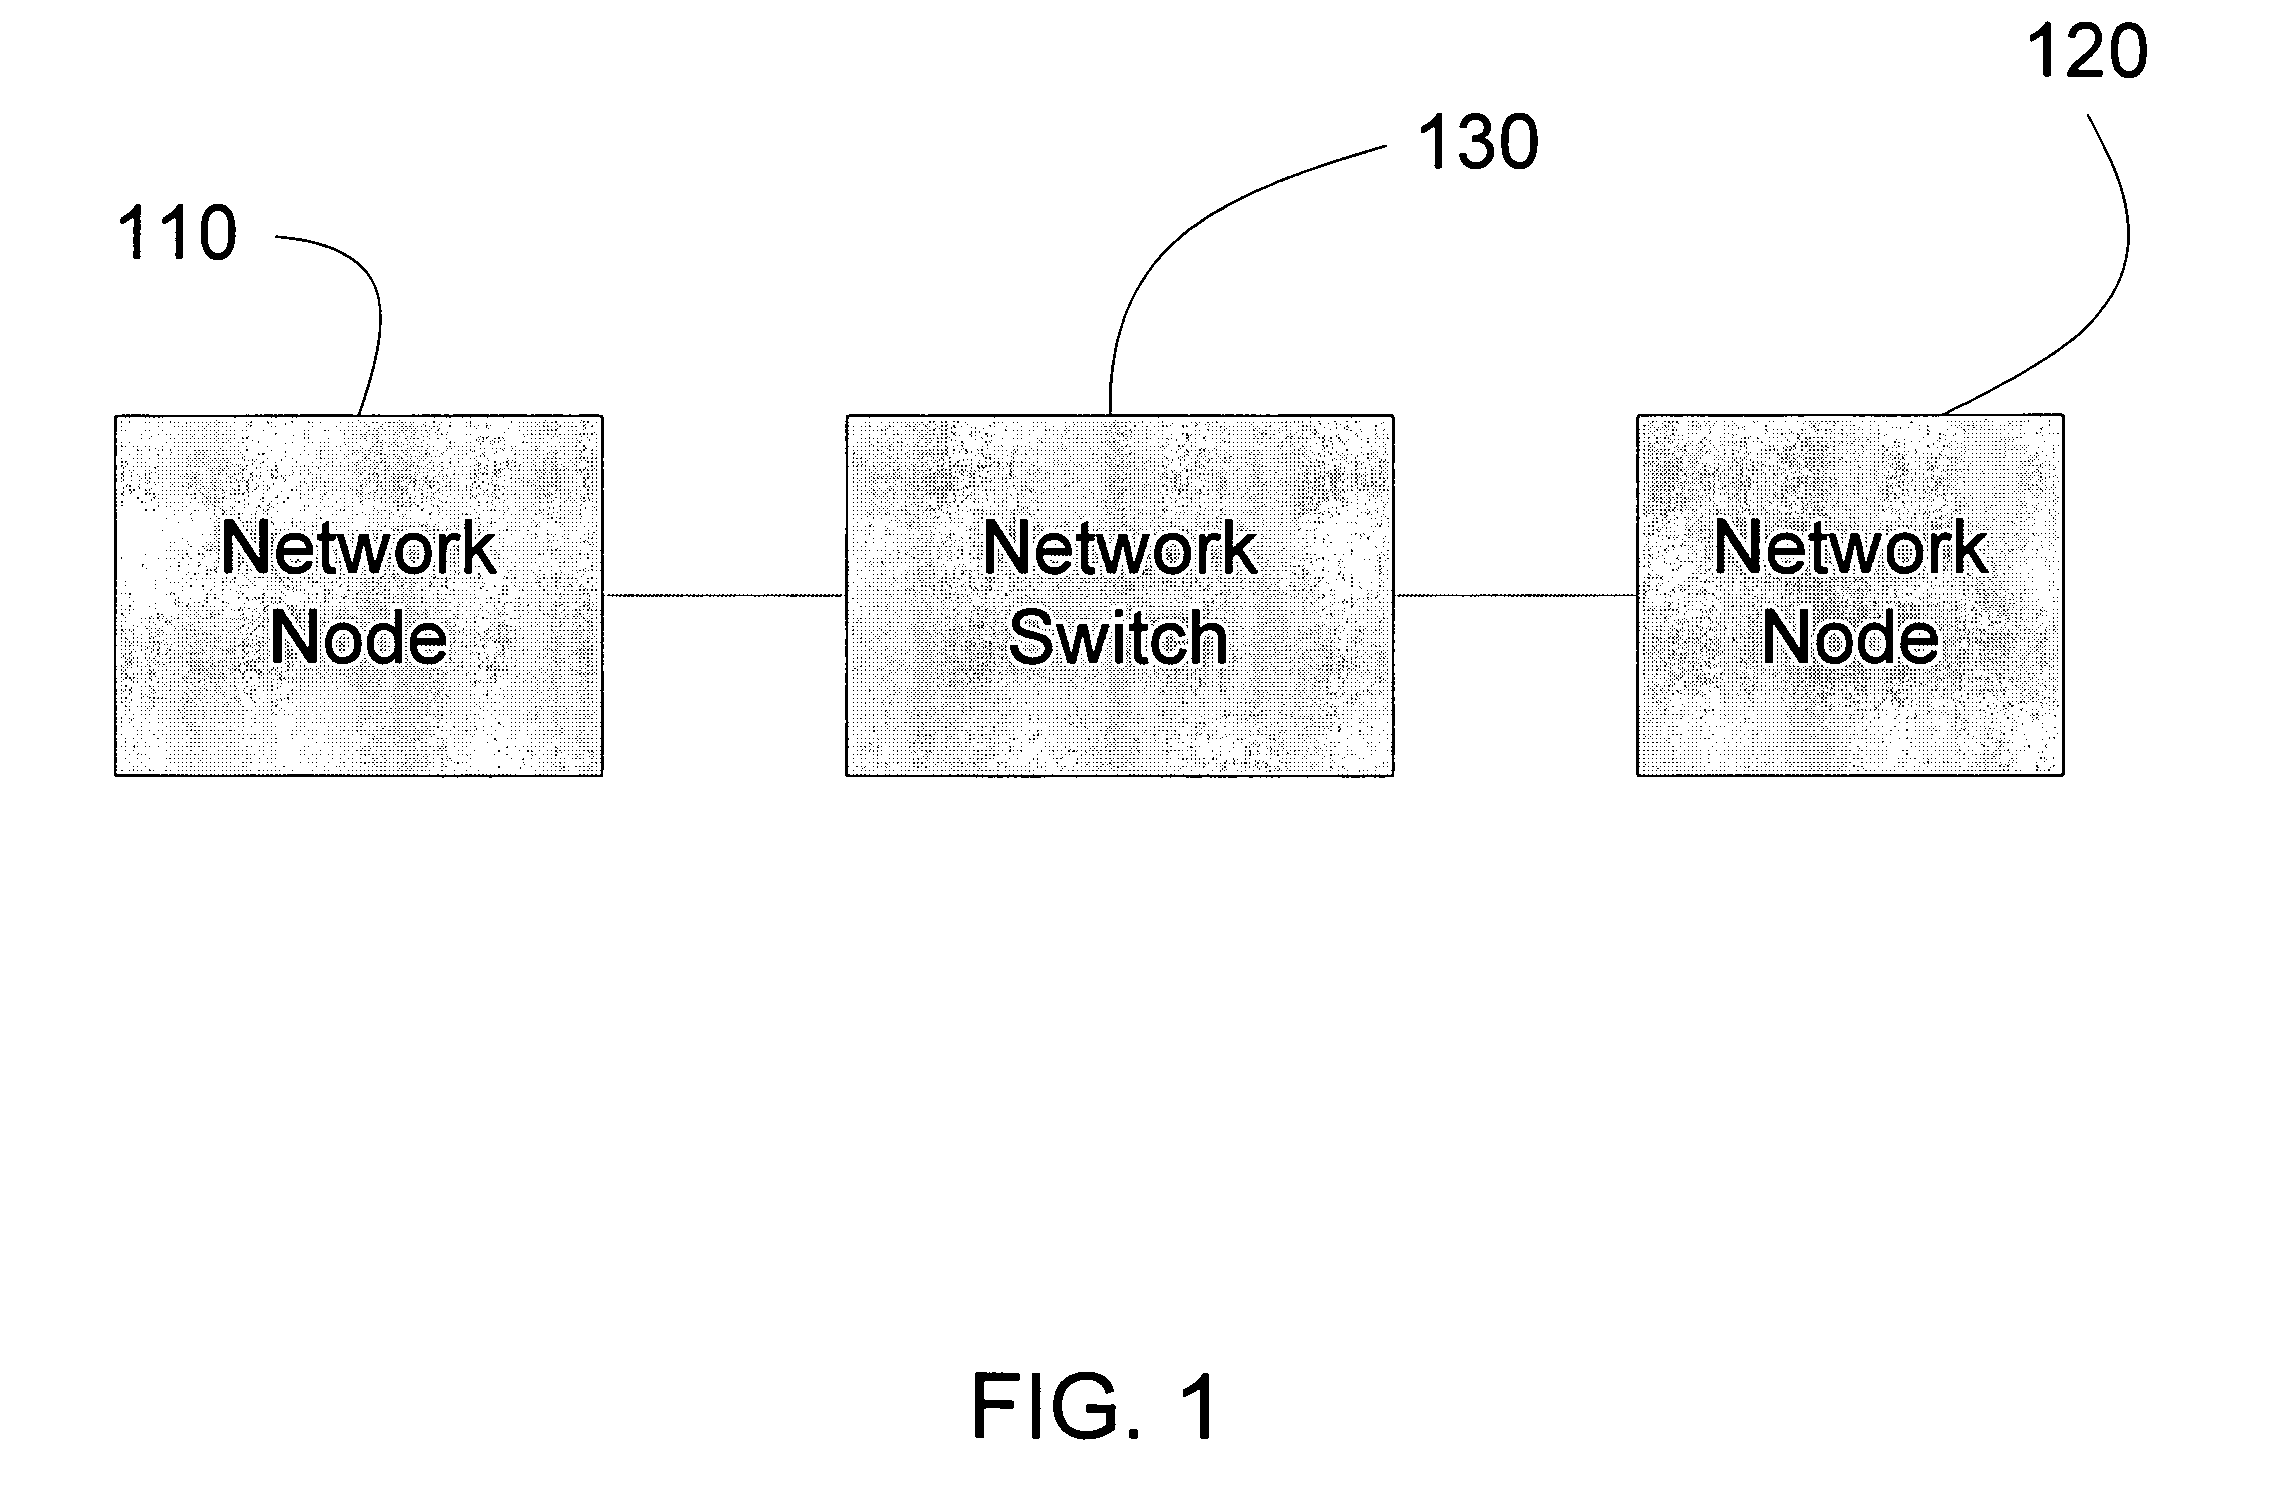 Method to dynamically create a virtual network